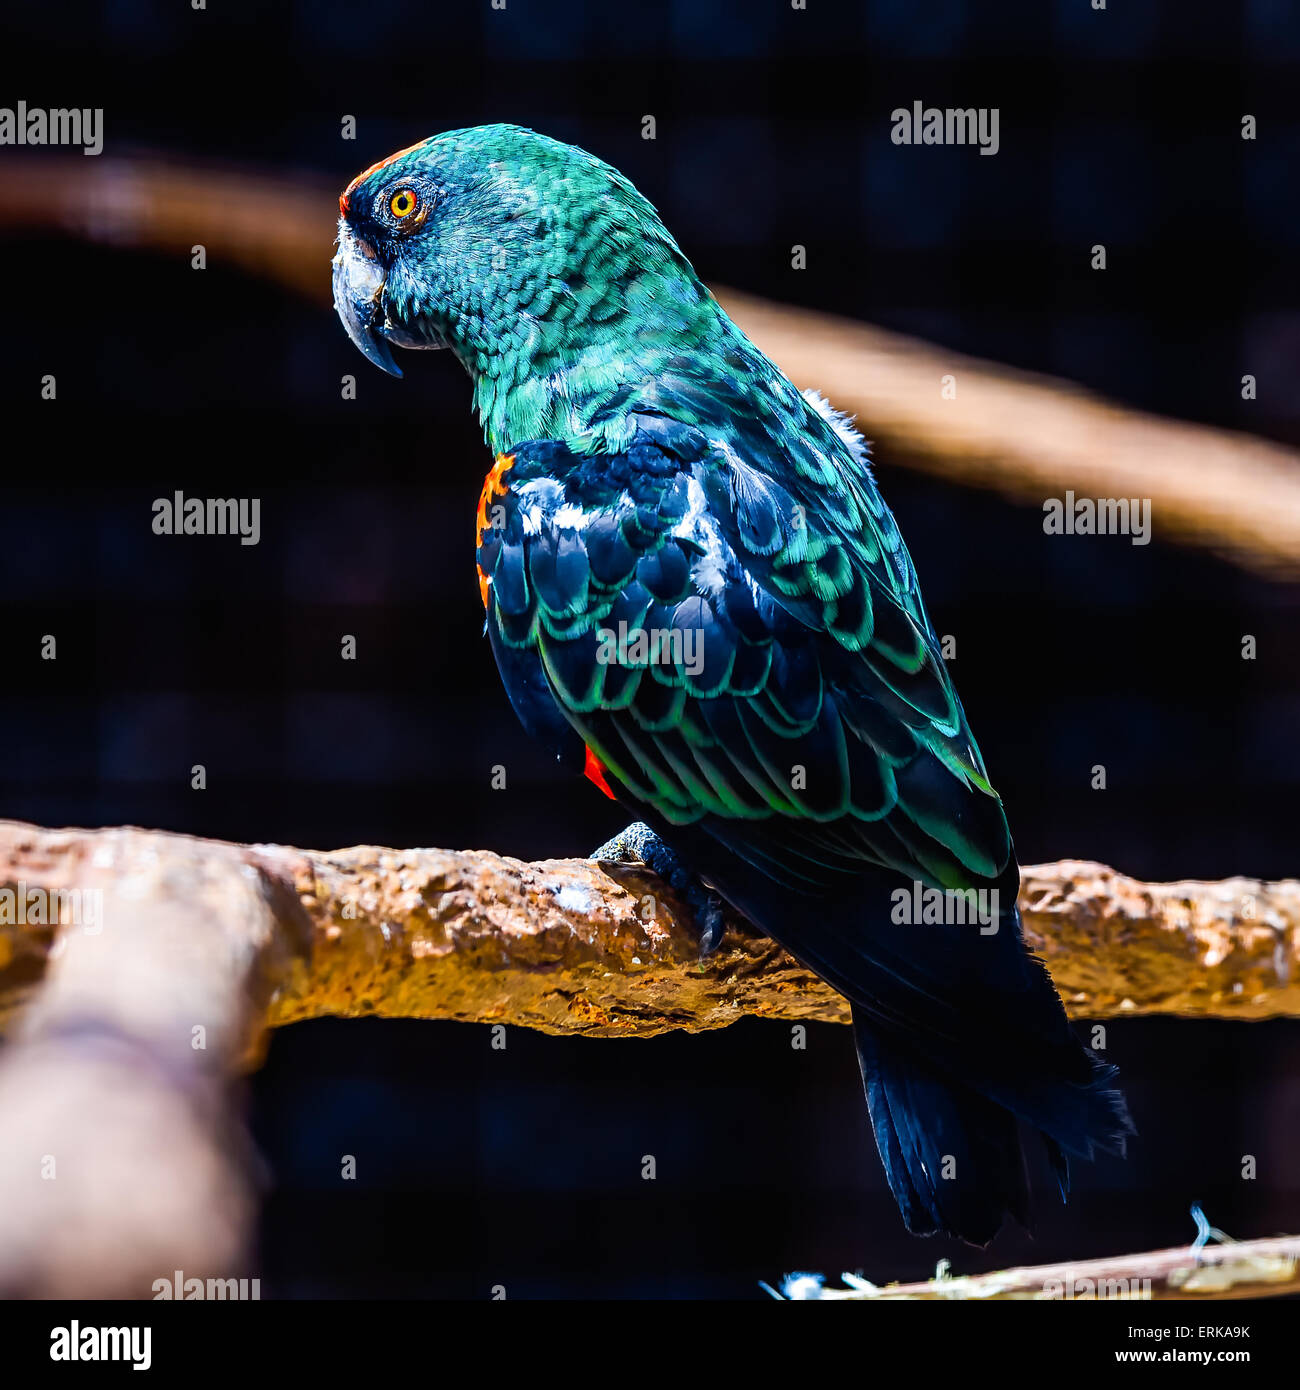 Blue and green parrot siting on wooden perch in zoo Stock Photo